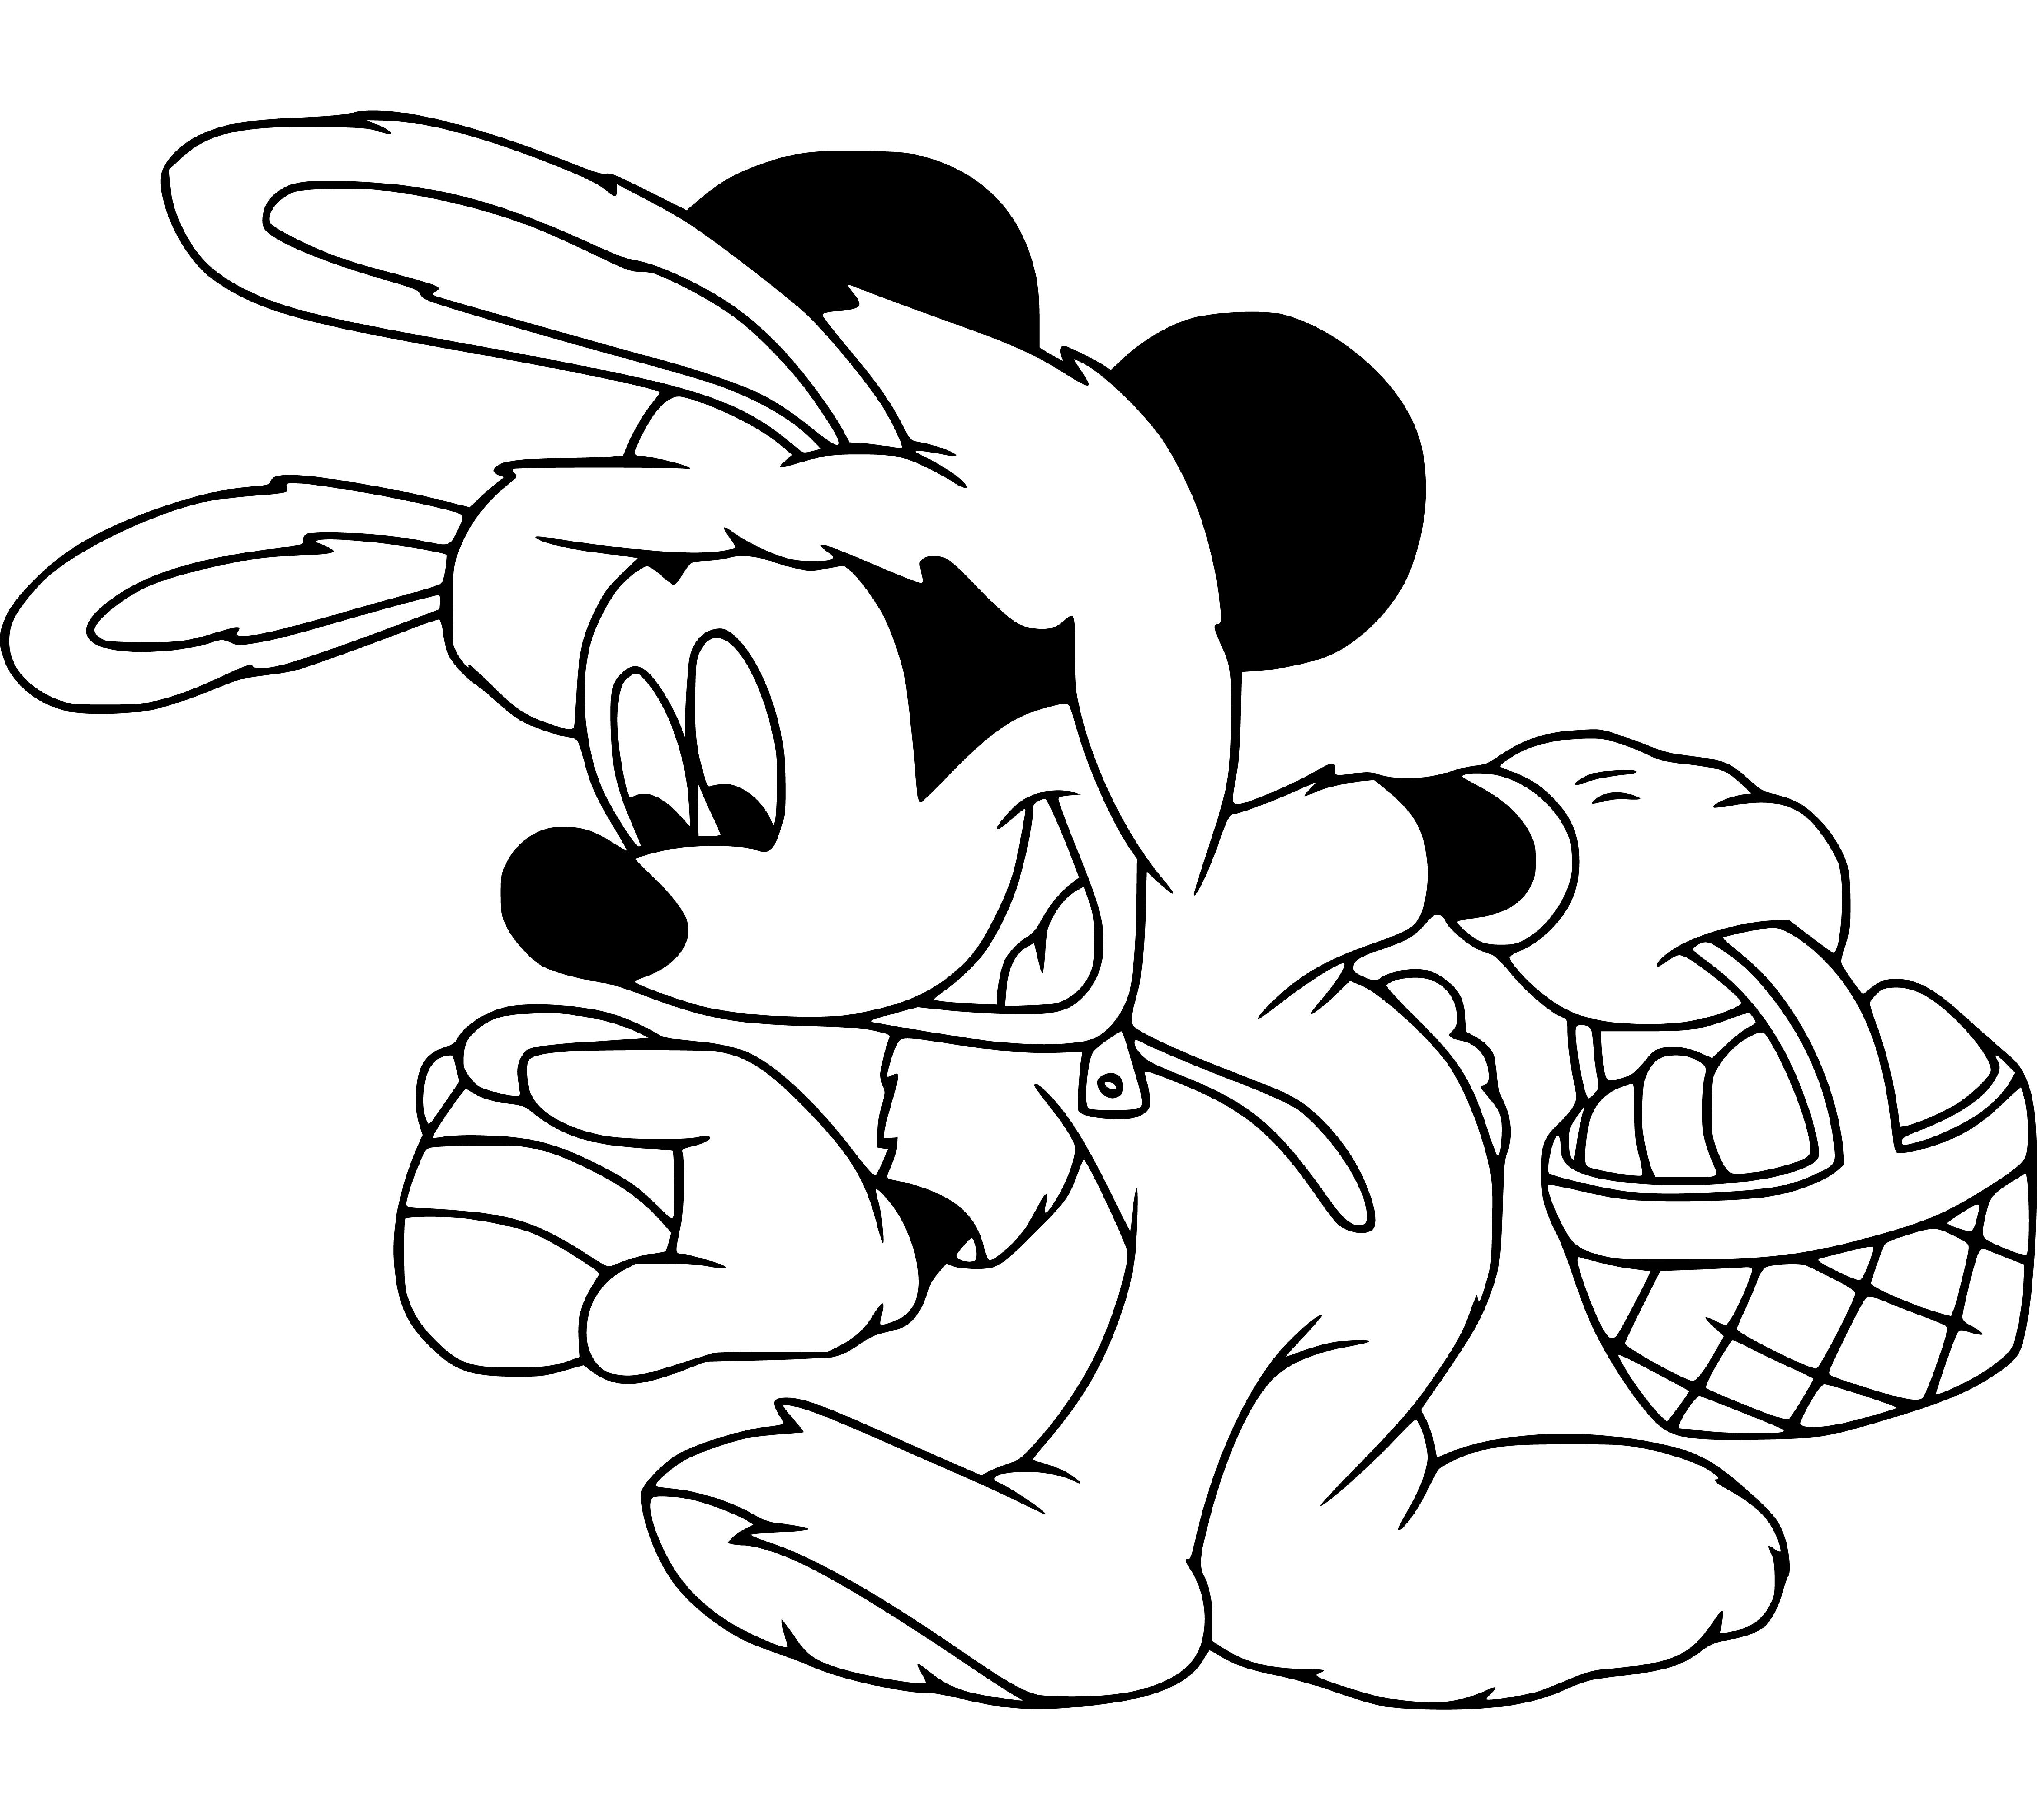 Mickey Mouse Easter Day Coloring Page for Children - SheetalColor.com